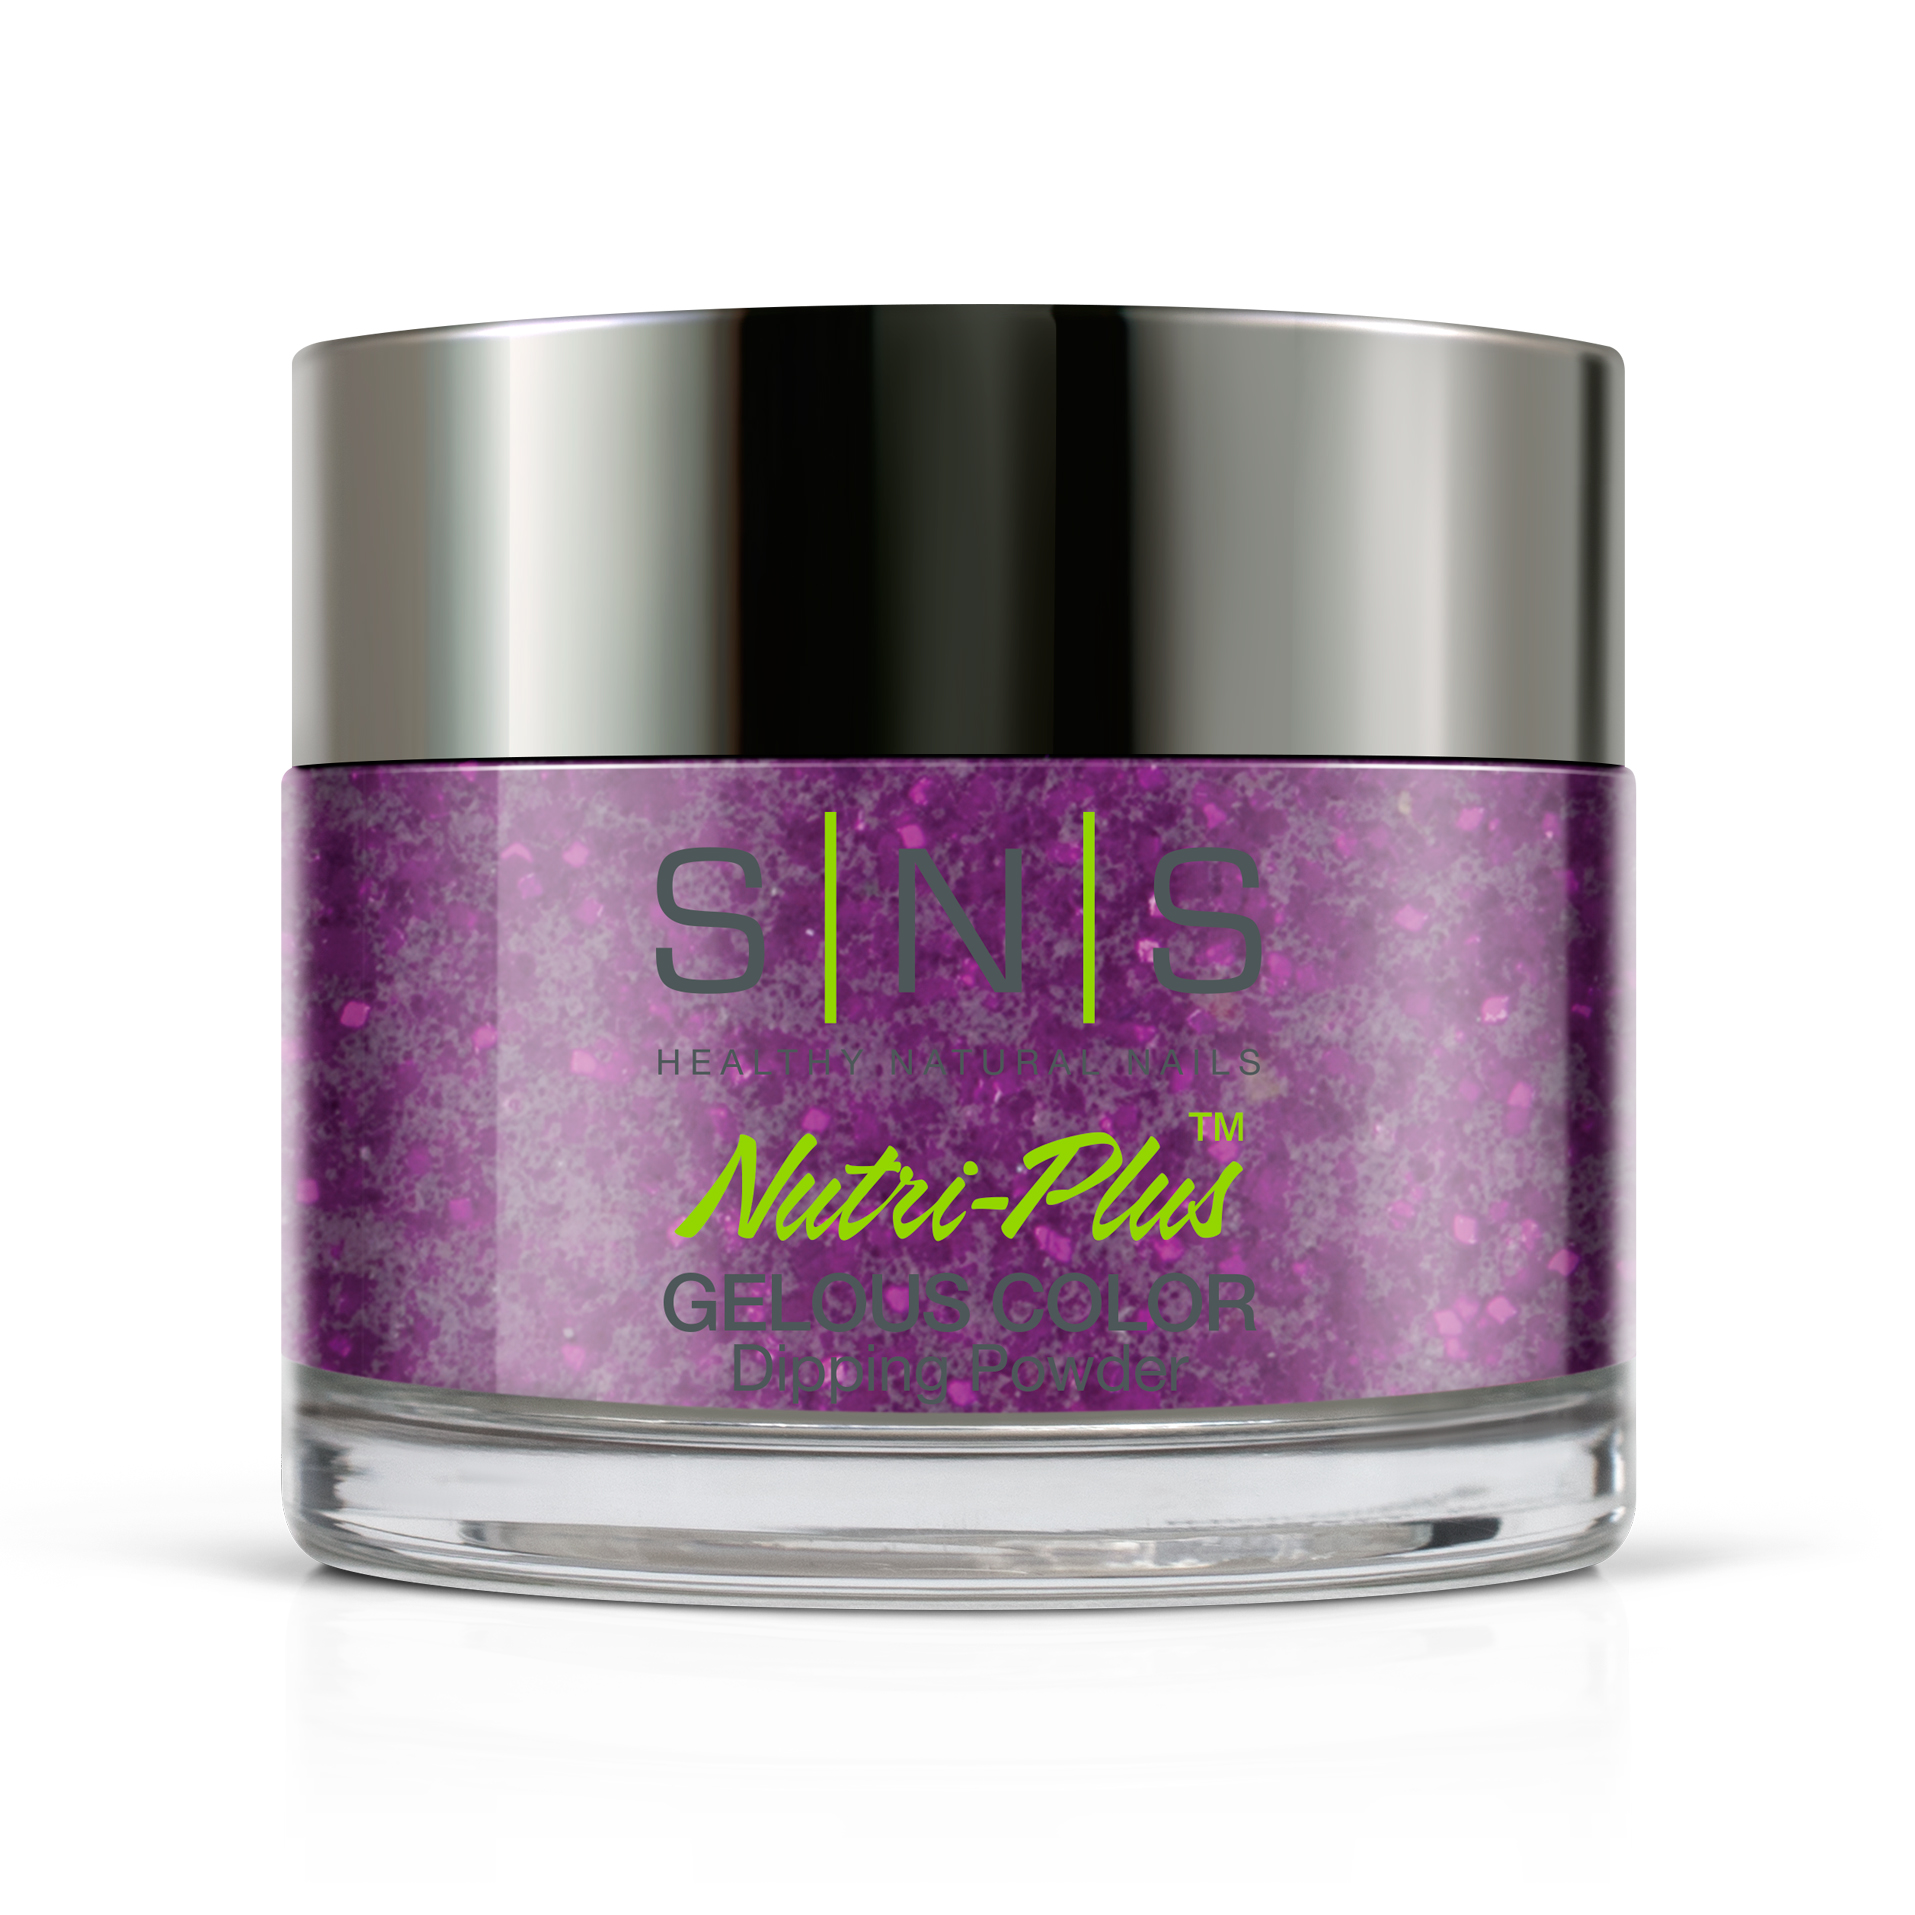 SNS Nails DS22 Picadilly 28g (1oz) | Gelous Dipping Powder